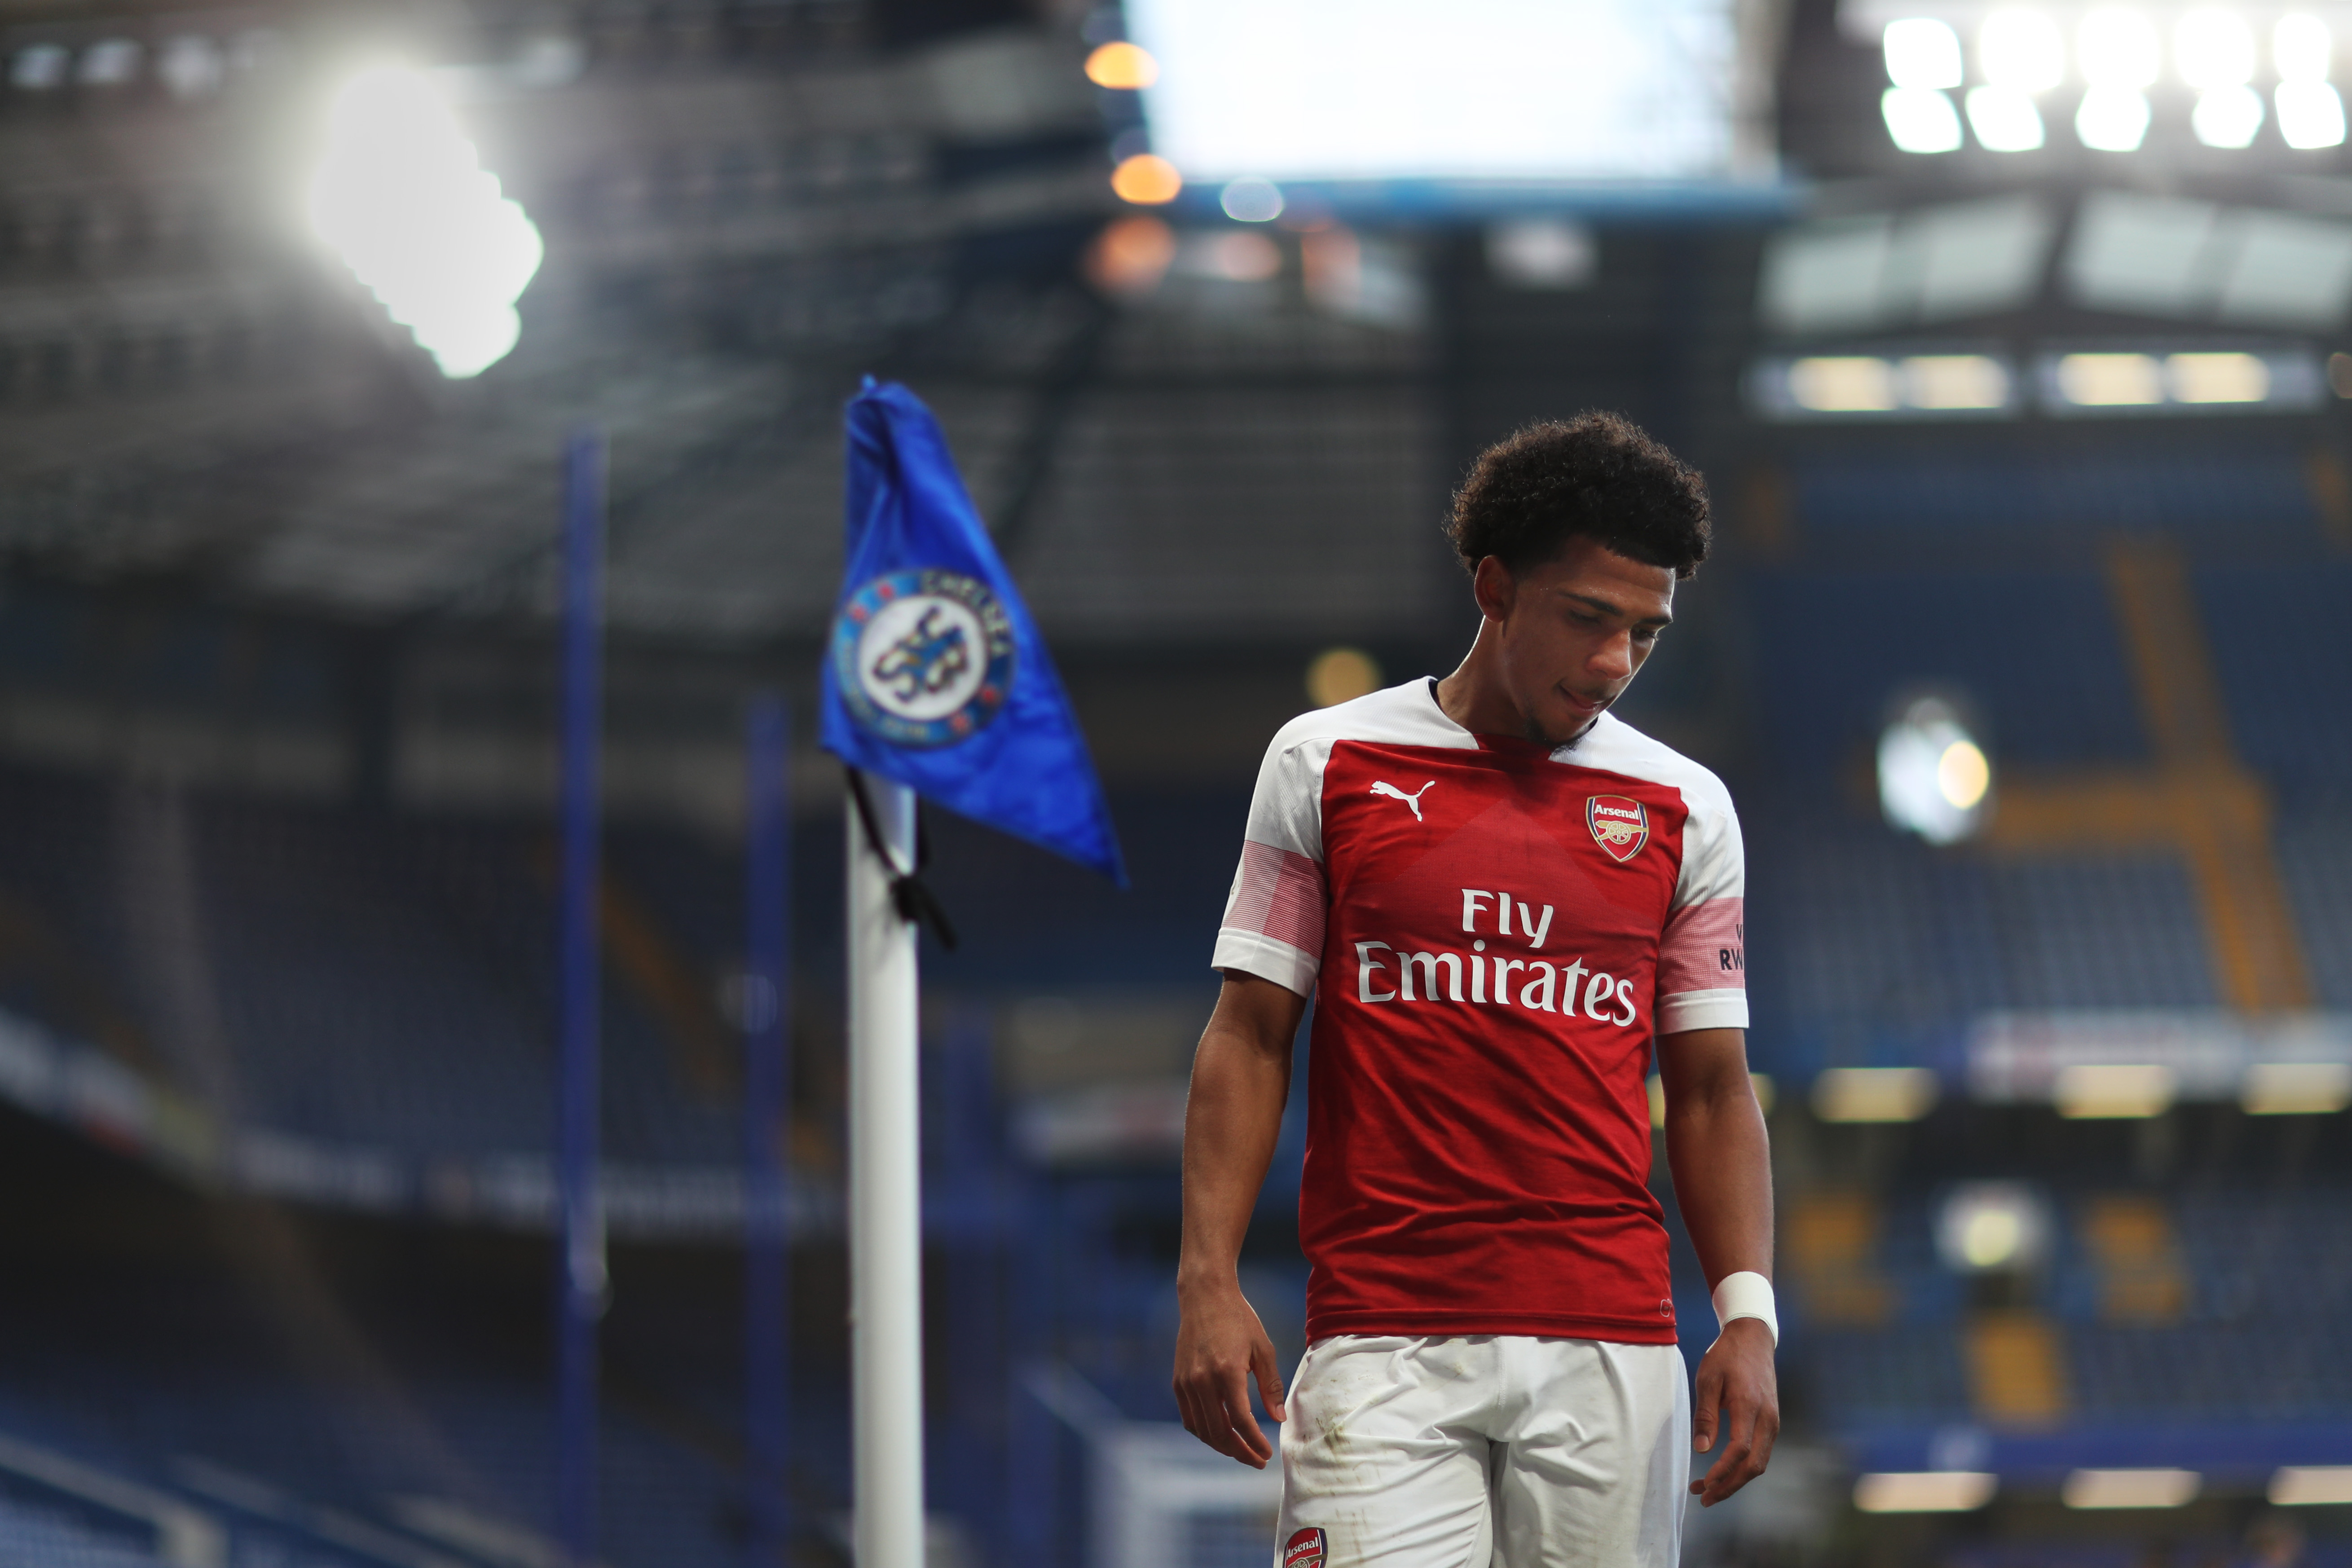 LONDON, ENGLAND - APRIL 15:     Xavier Amaechi of Arsenal prepares to take a corner kick during the Premier League 2 match between Chelsea and Arsenal at Stamford Bridge on April 15, 2019 in London, England. (Photo by Naomi Baker/Getty Images)